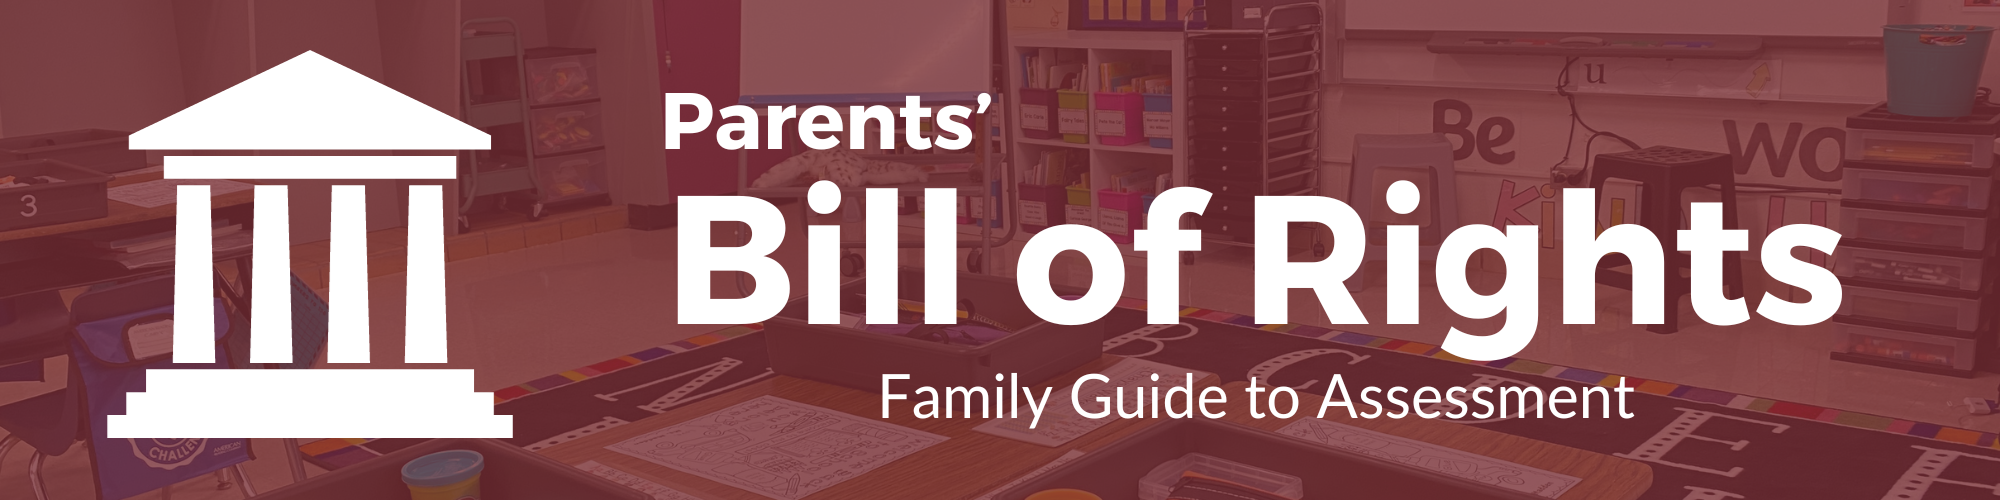 Parents' Bill of Rights Family Guide to Assessment text over burgundy background with faded photograph of a classroom